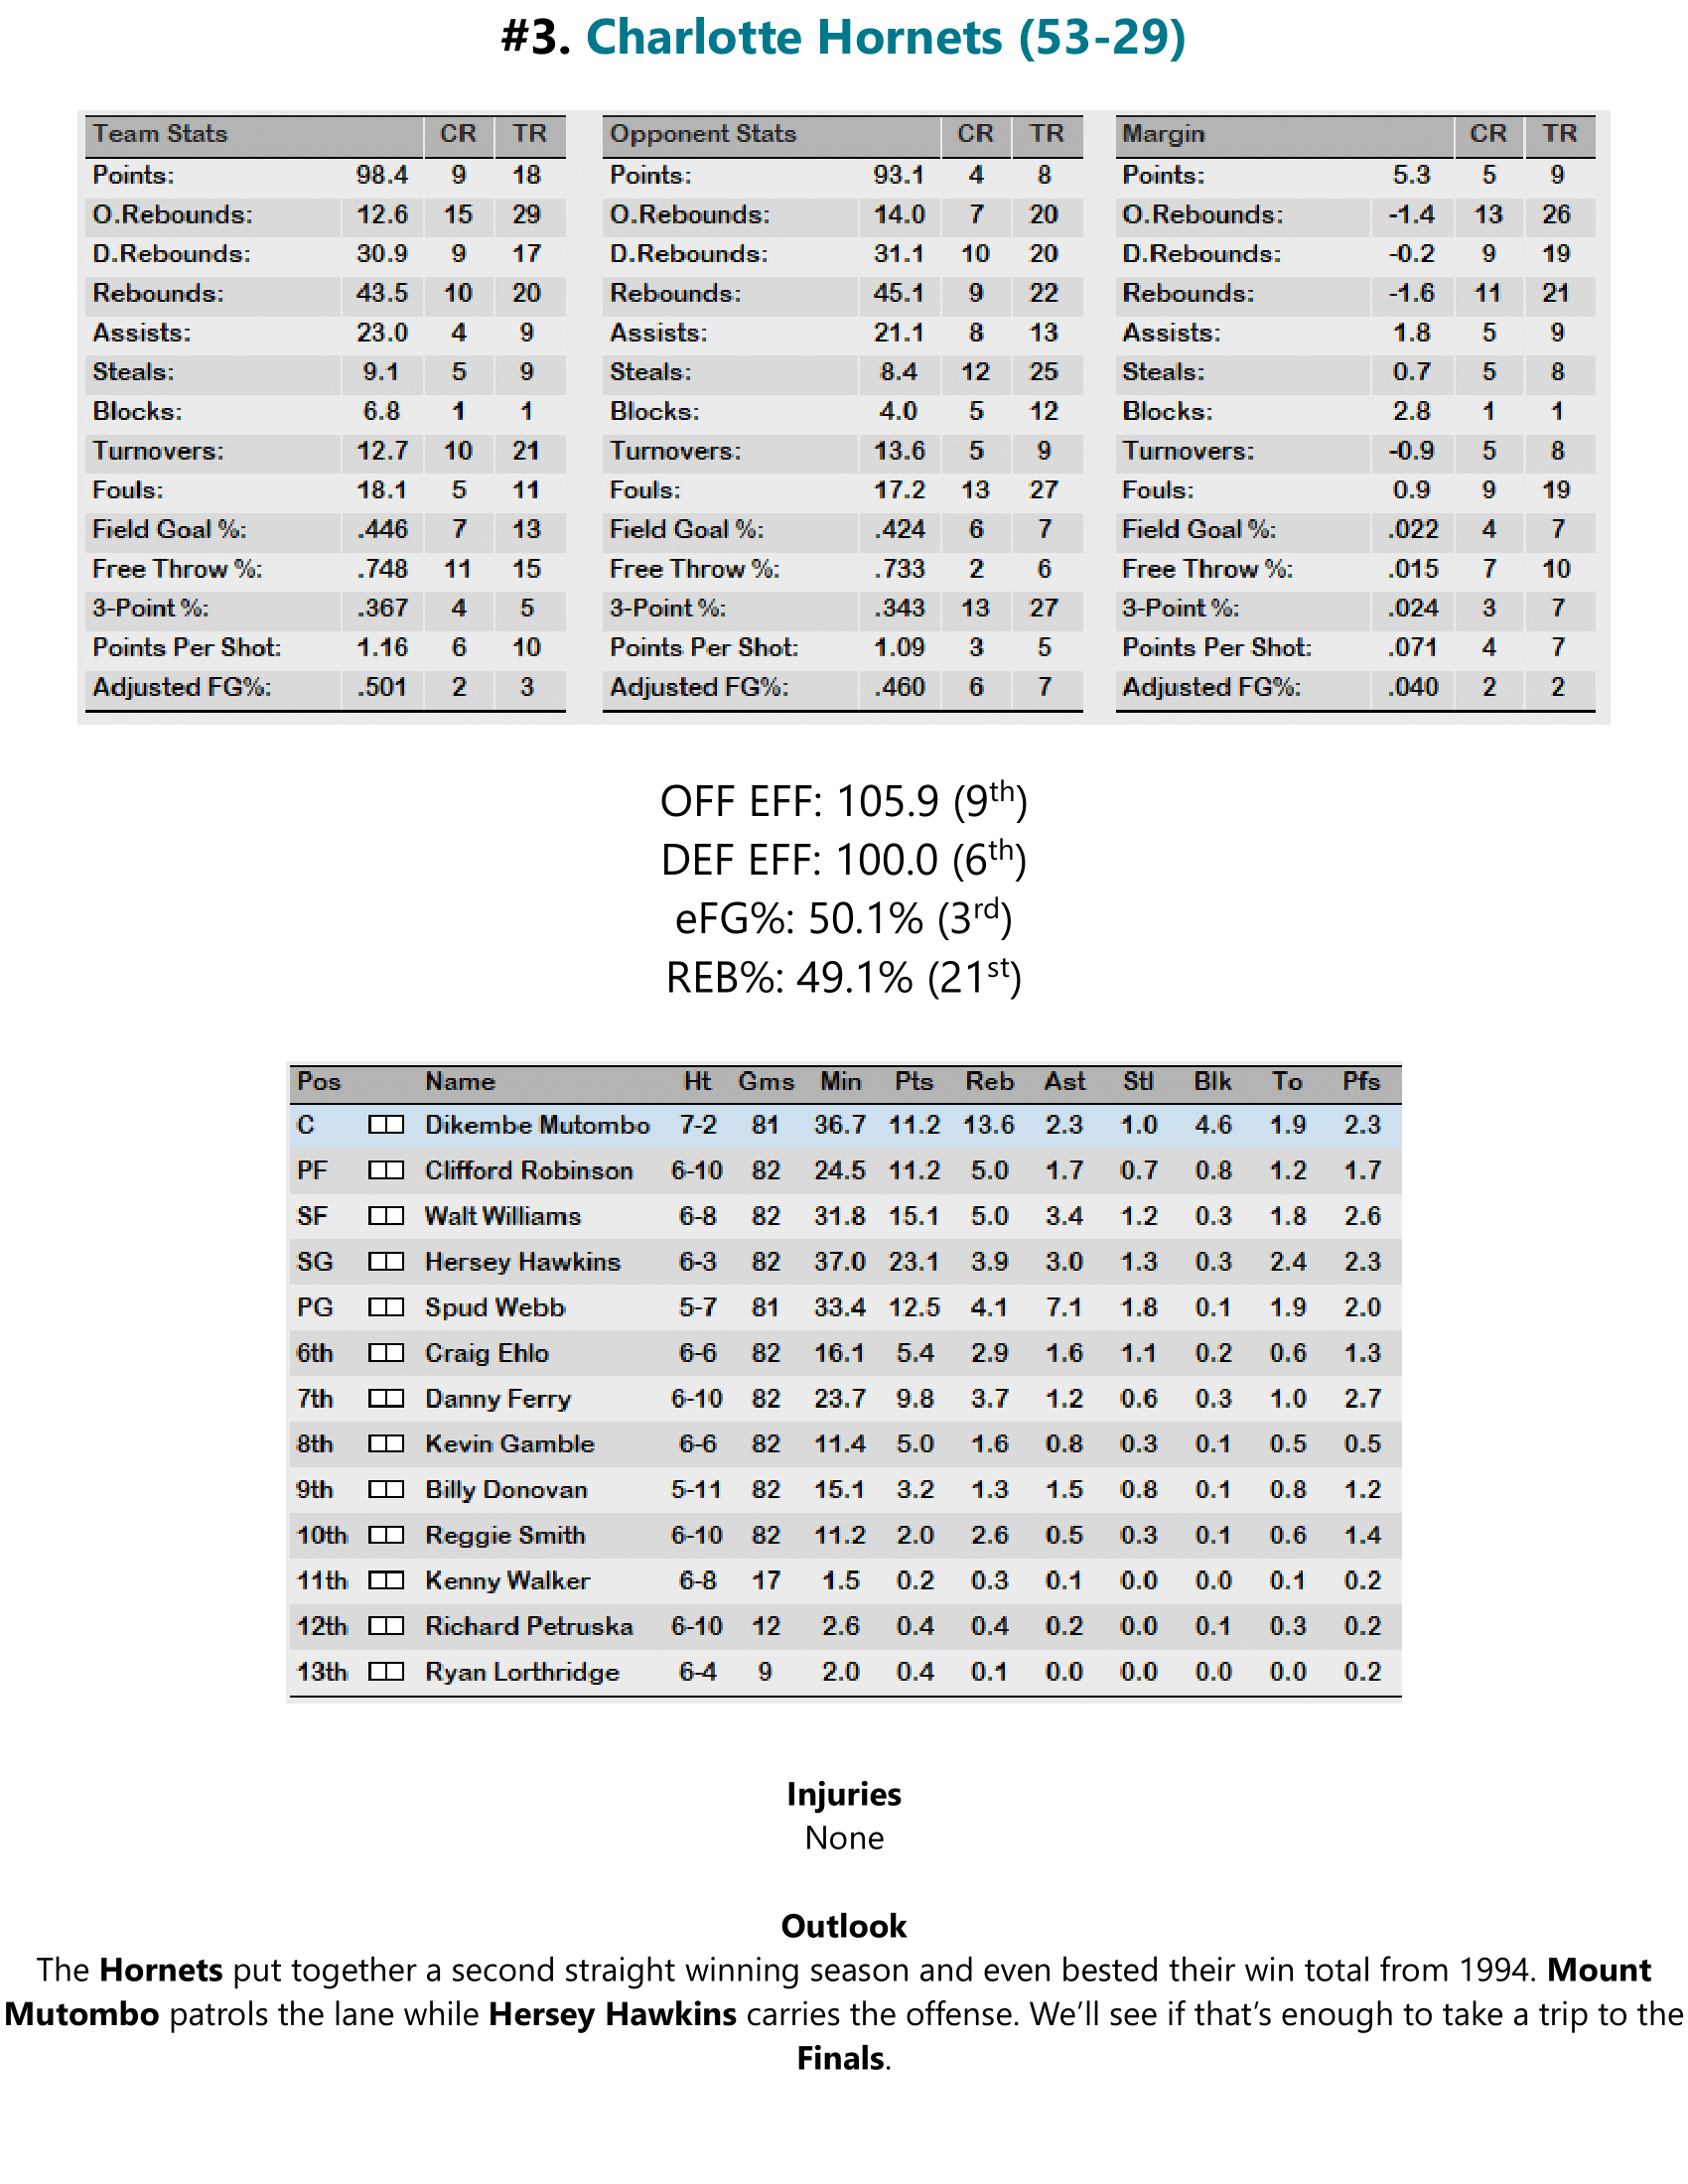 94-95-Part-3-Playoff-Preview-12.png